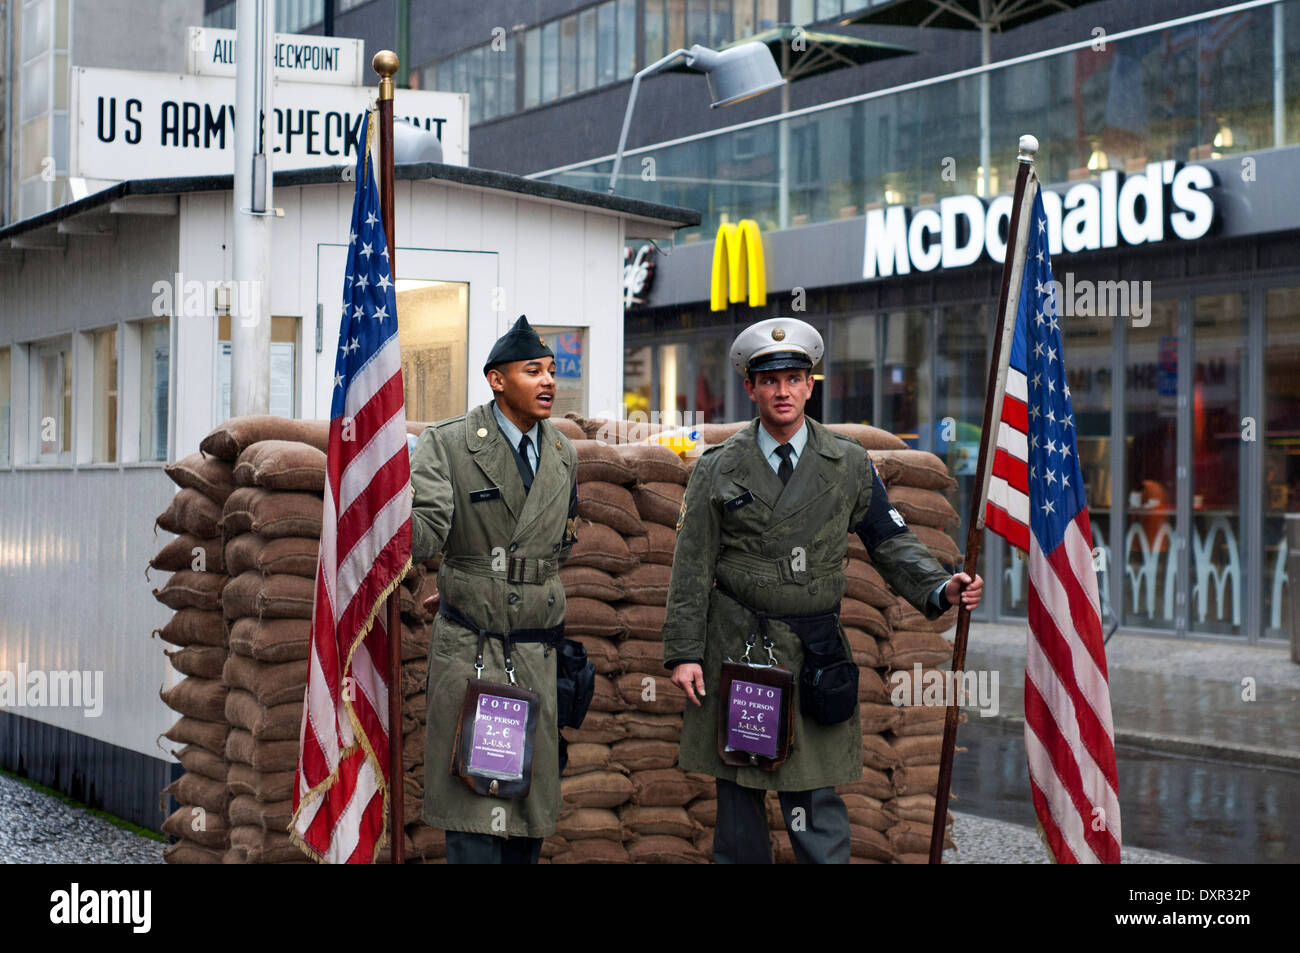 Berlin cold war Checkpoint Charlie Friedrichstrasse notorious border crossing American Soviet sectors east west wall. McDonald's Stock Photo